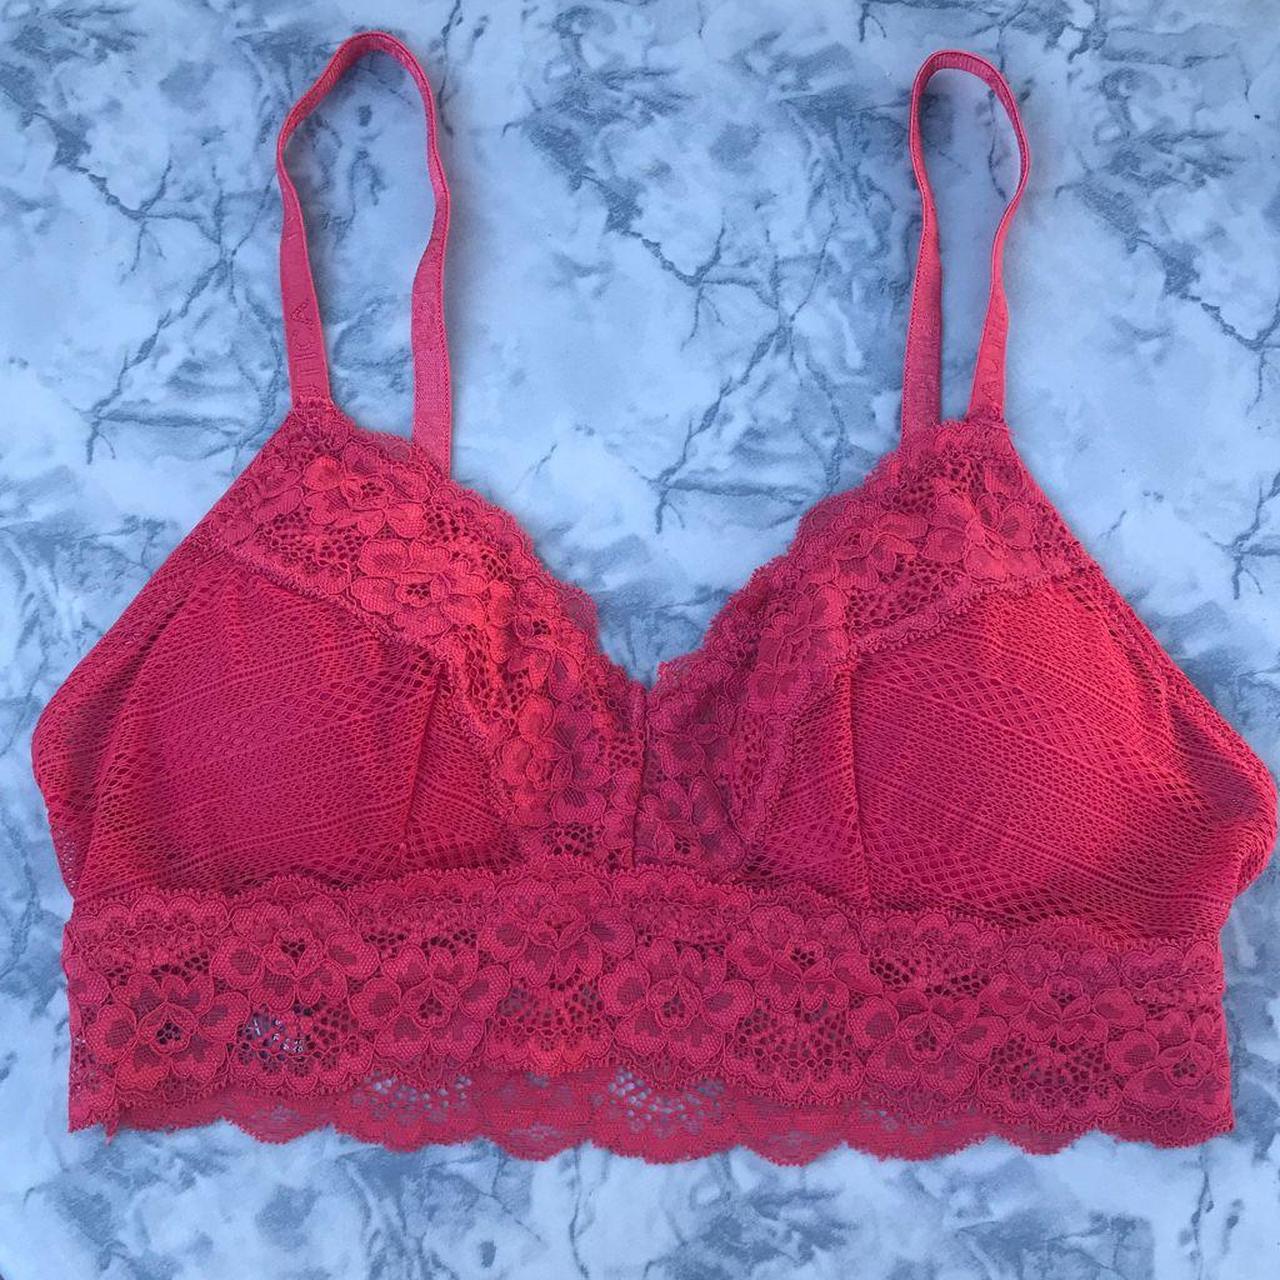 NWOT Nautica Bralette, Size Small. Removable